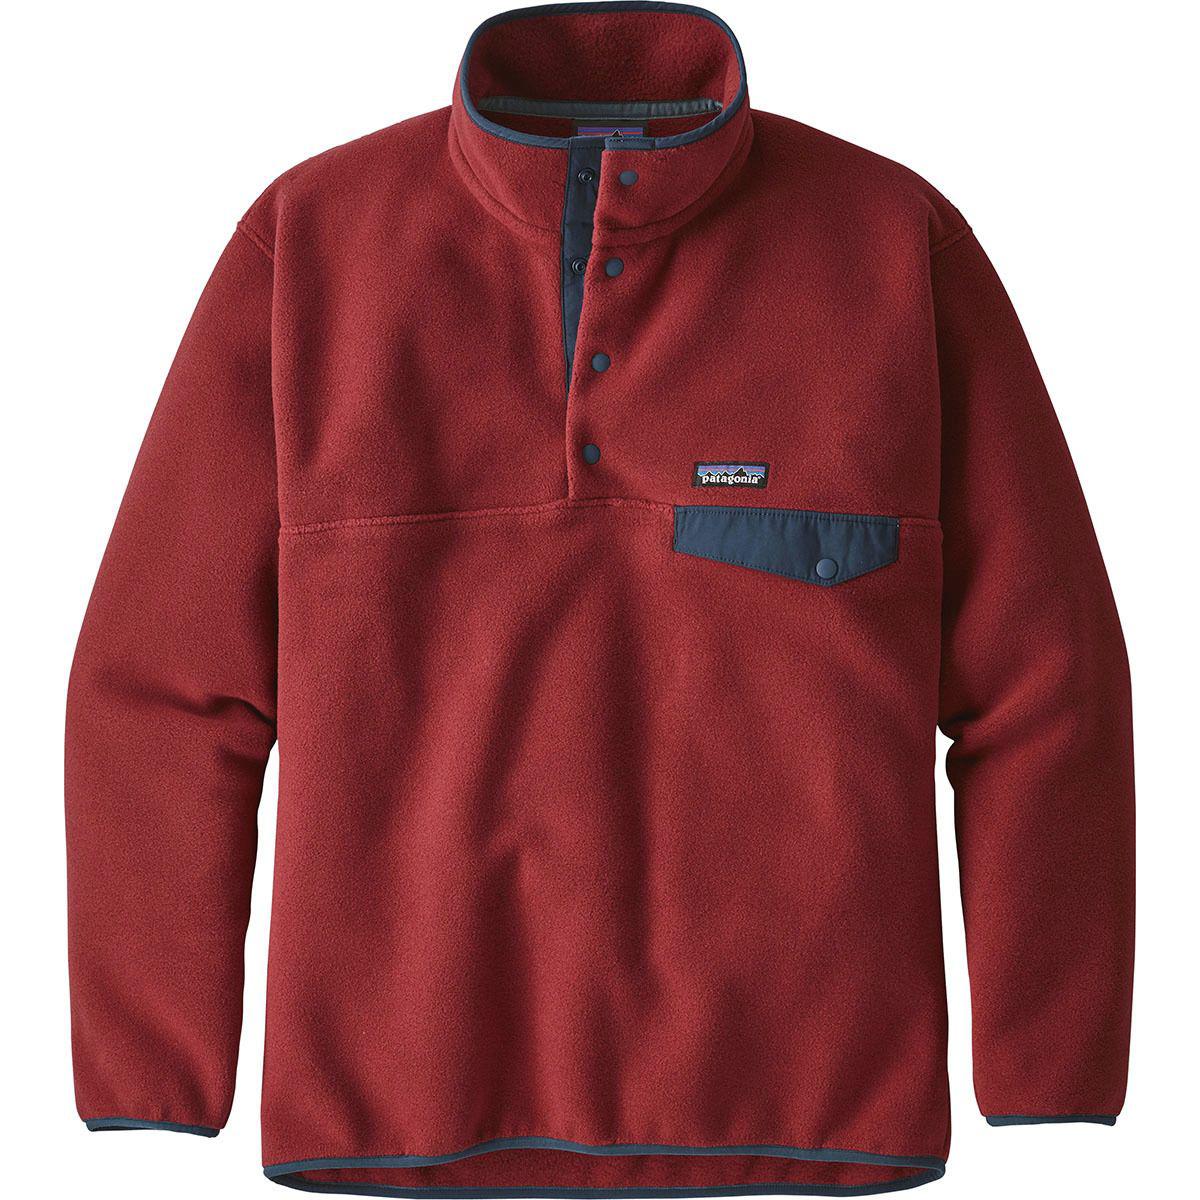 Patagonia Synchilla Snap-t Fleece Pullover in Red for Men - Lyst